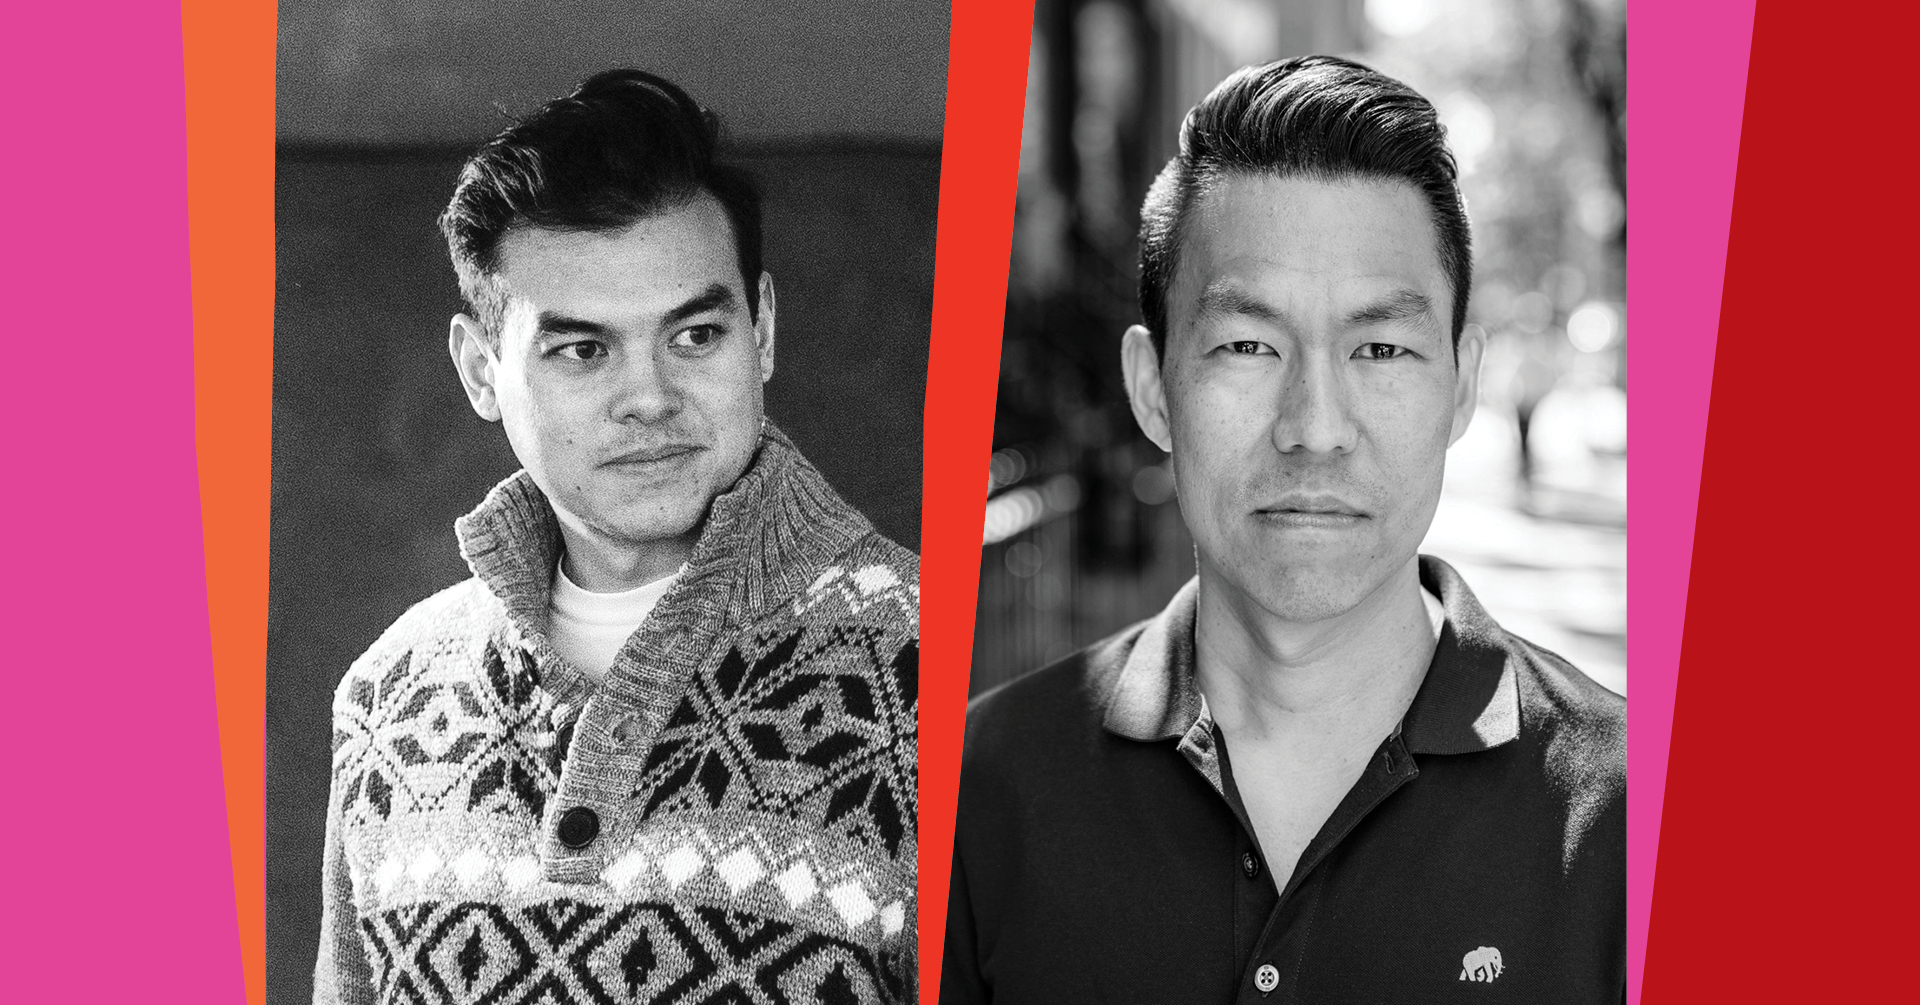 The Immigrant Experience: Marc Herman Lynch & Jack Wang